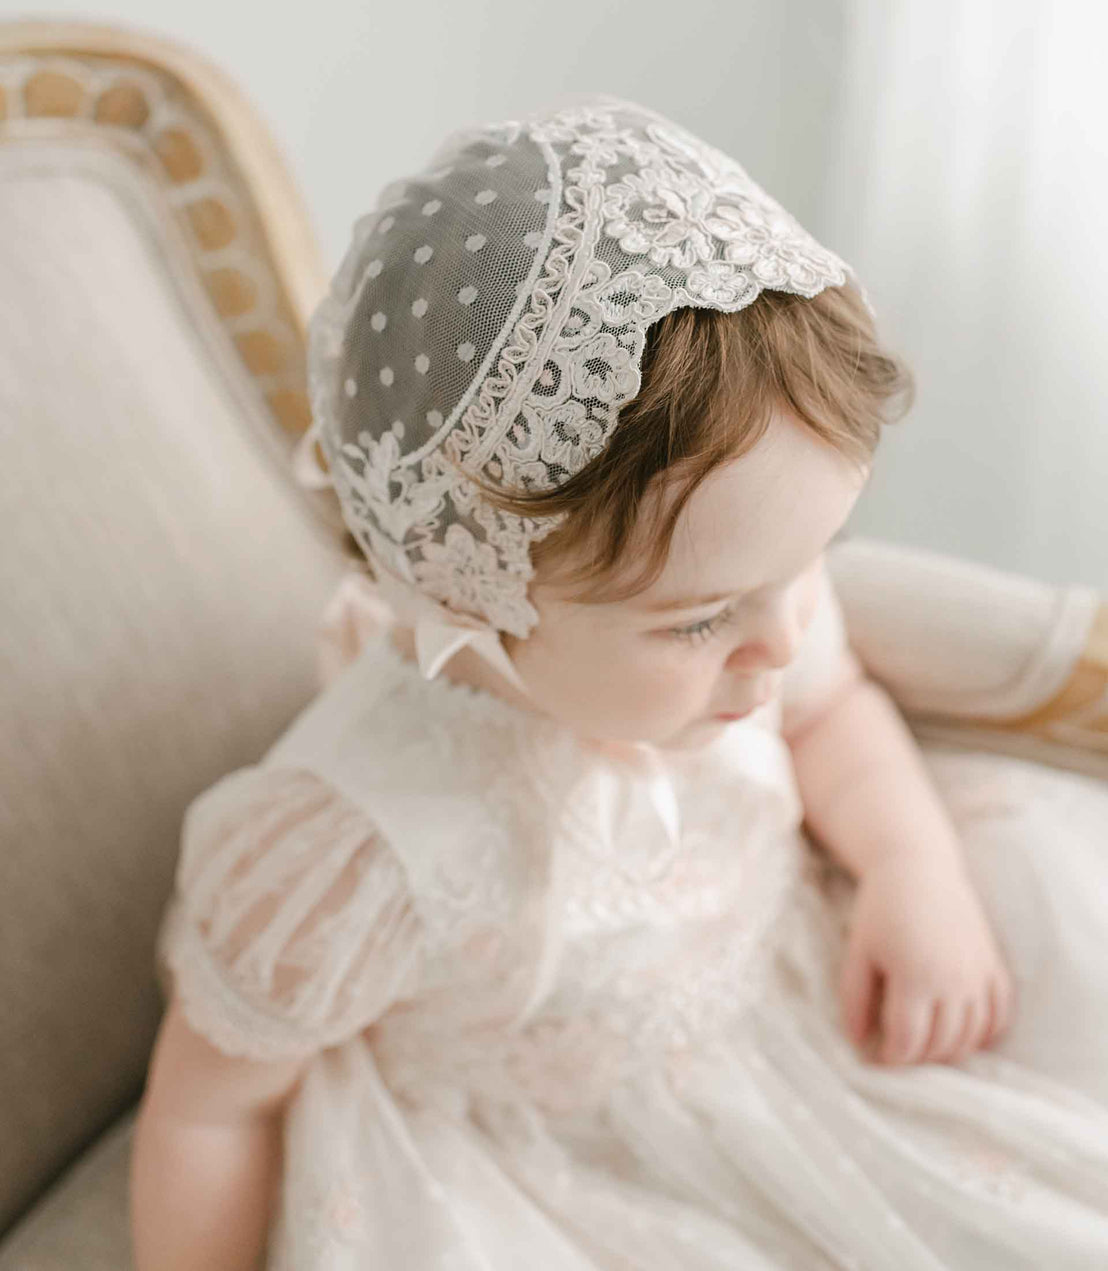 A baby girl wearing the Elizabeth Christening Gown & Bonnet looks down thoughtfully while sitting on an elegant vintage chair.